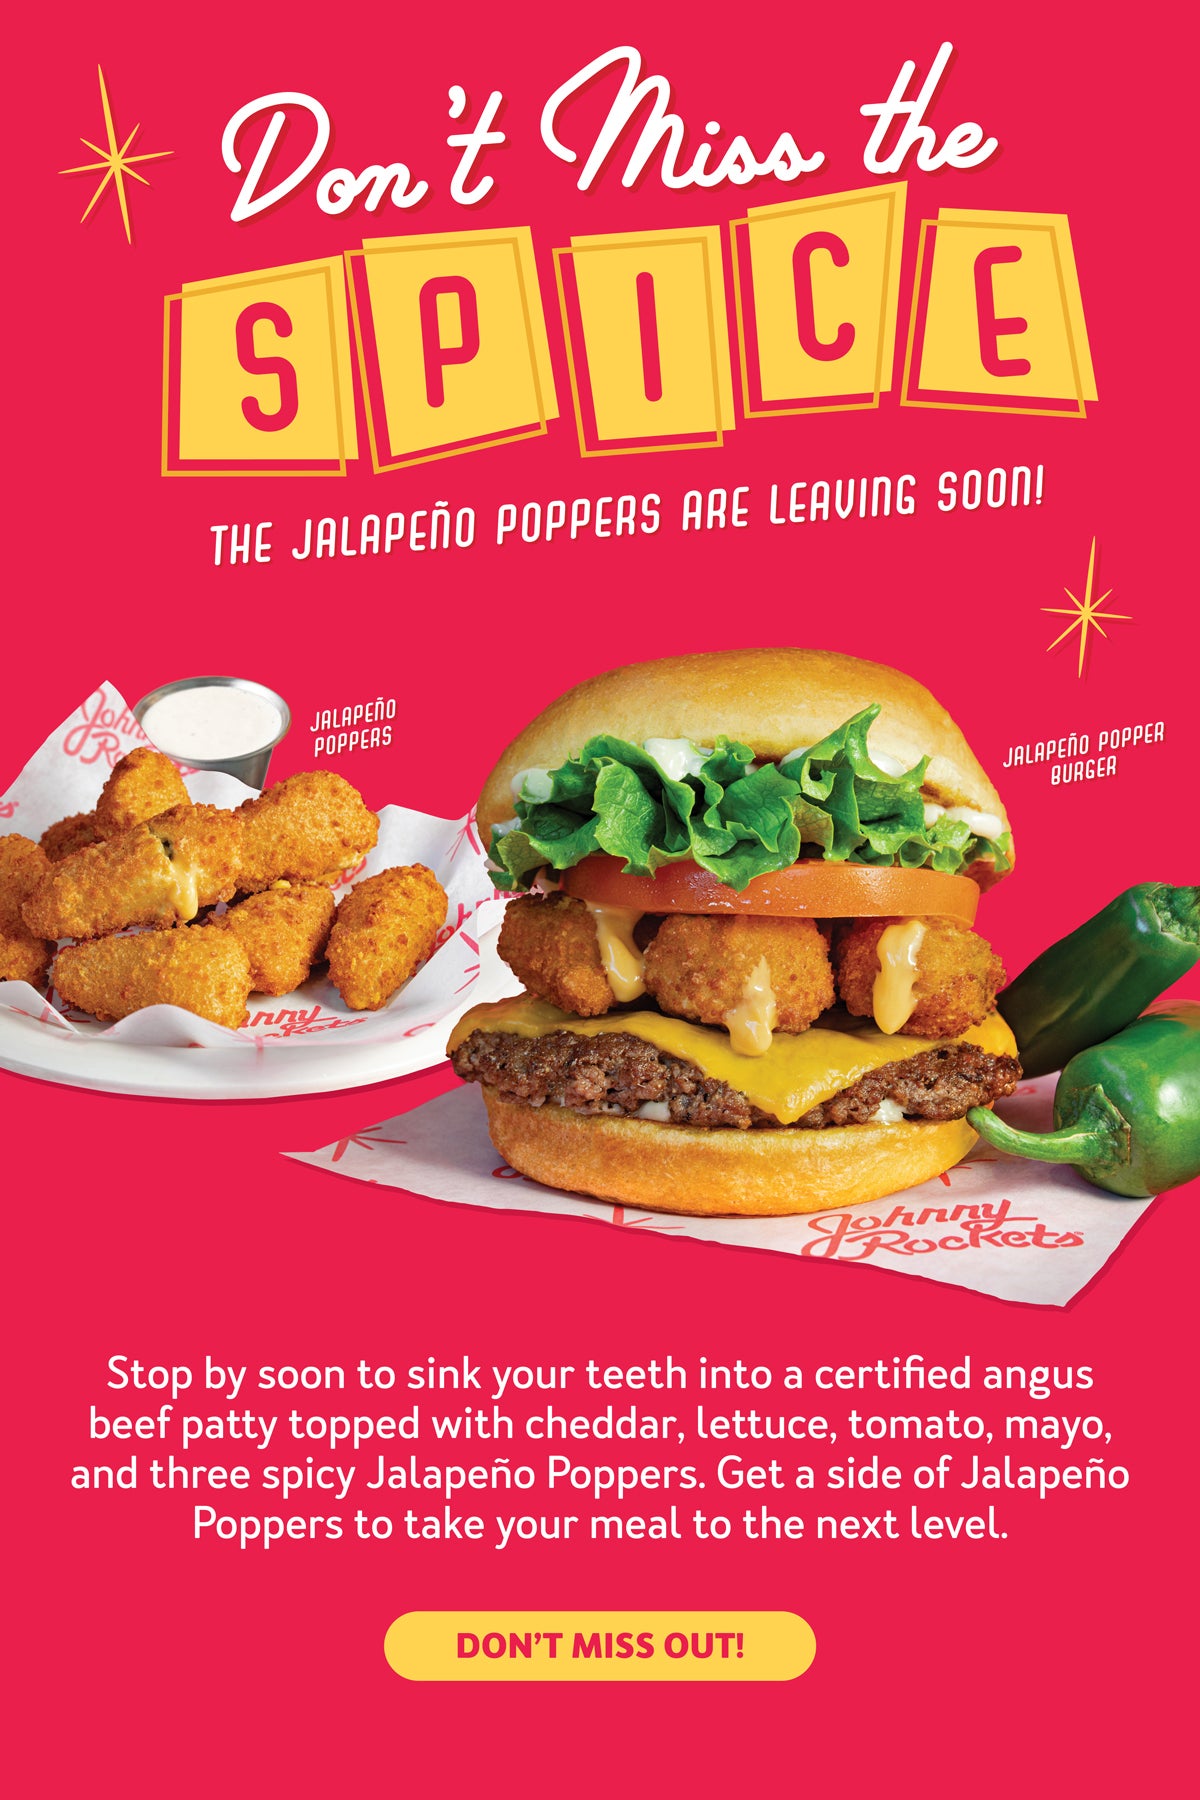 Try Our Jalapeo Popper Burger and Jalapeo Poppers - available for a limited time only!